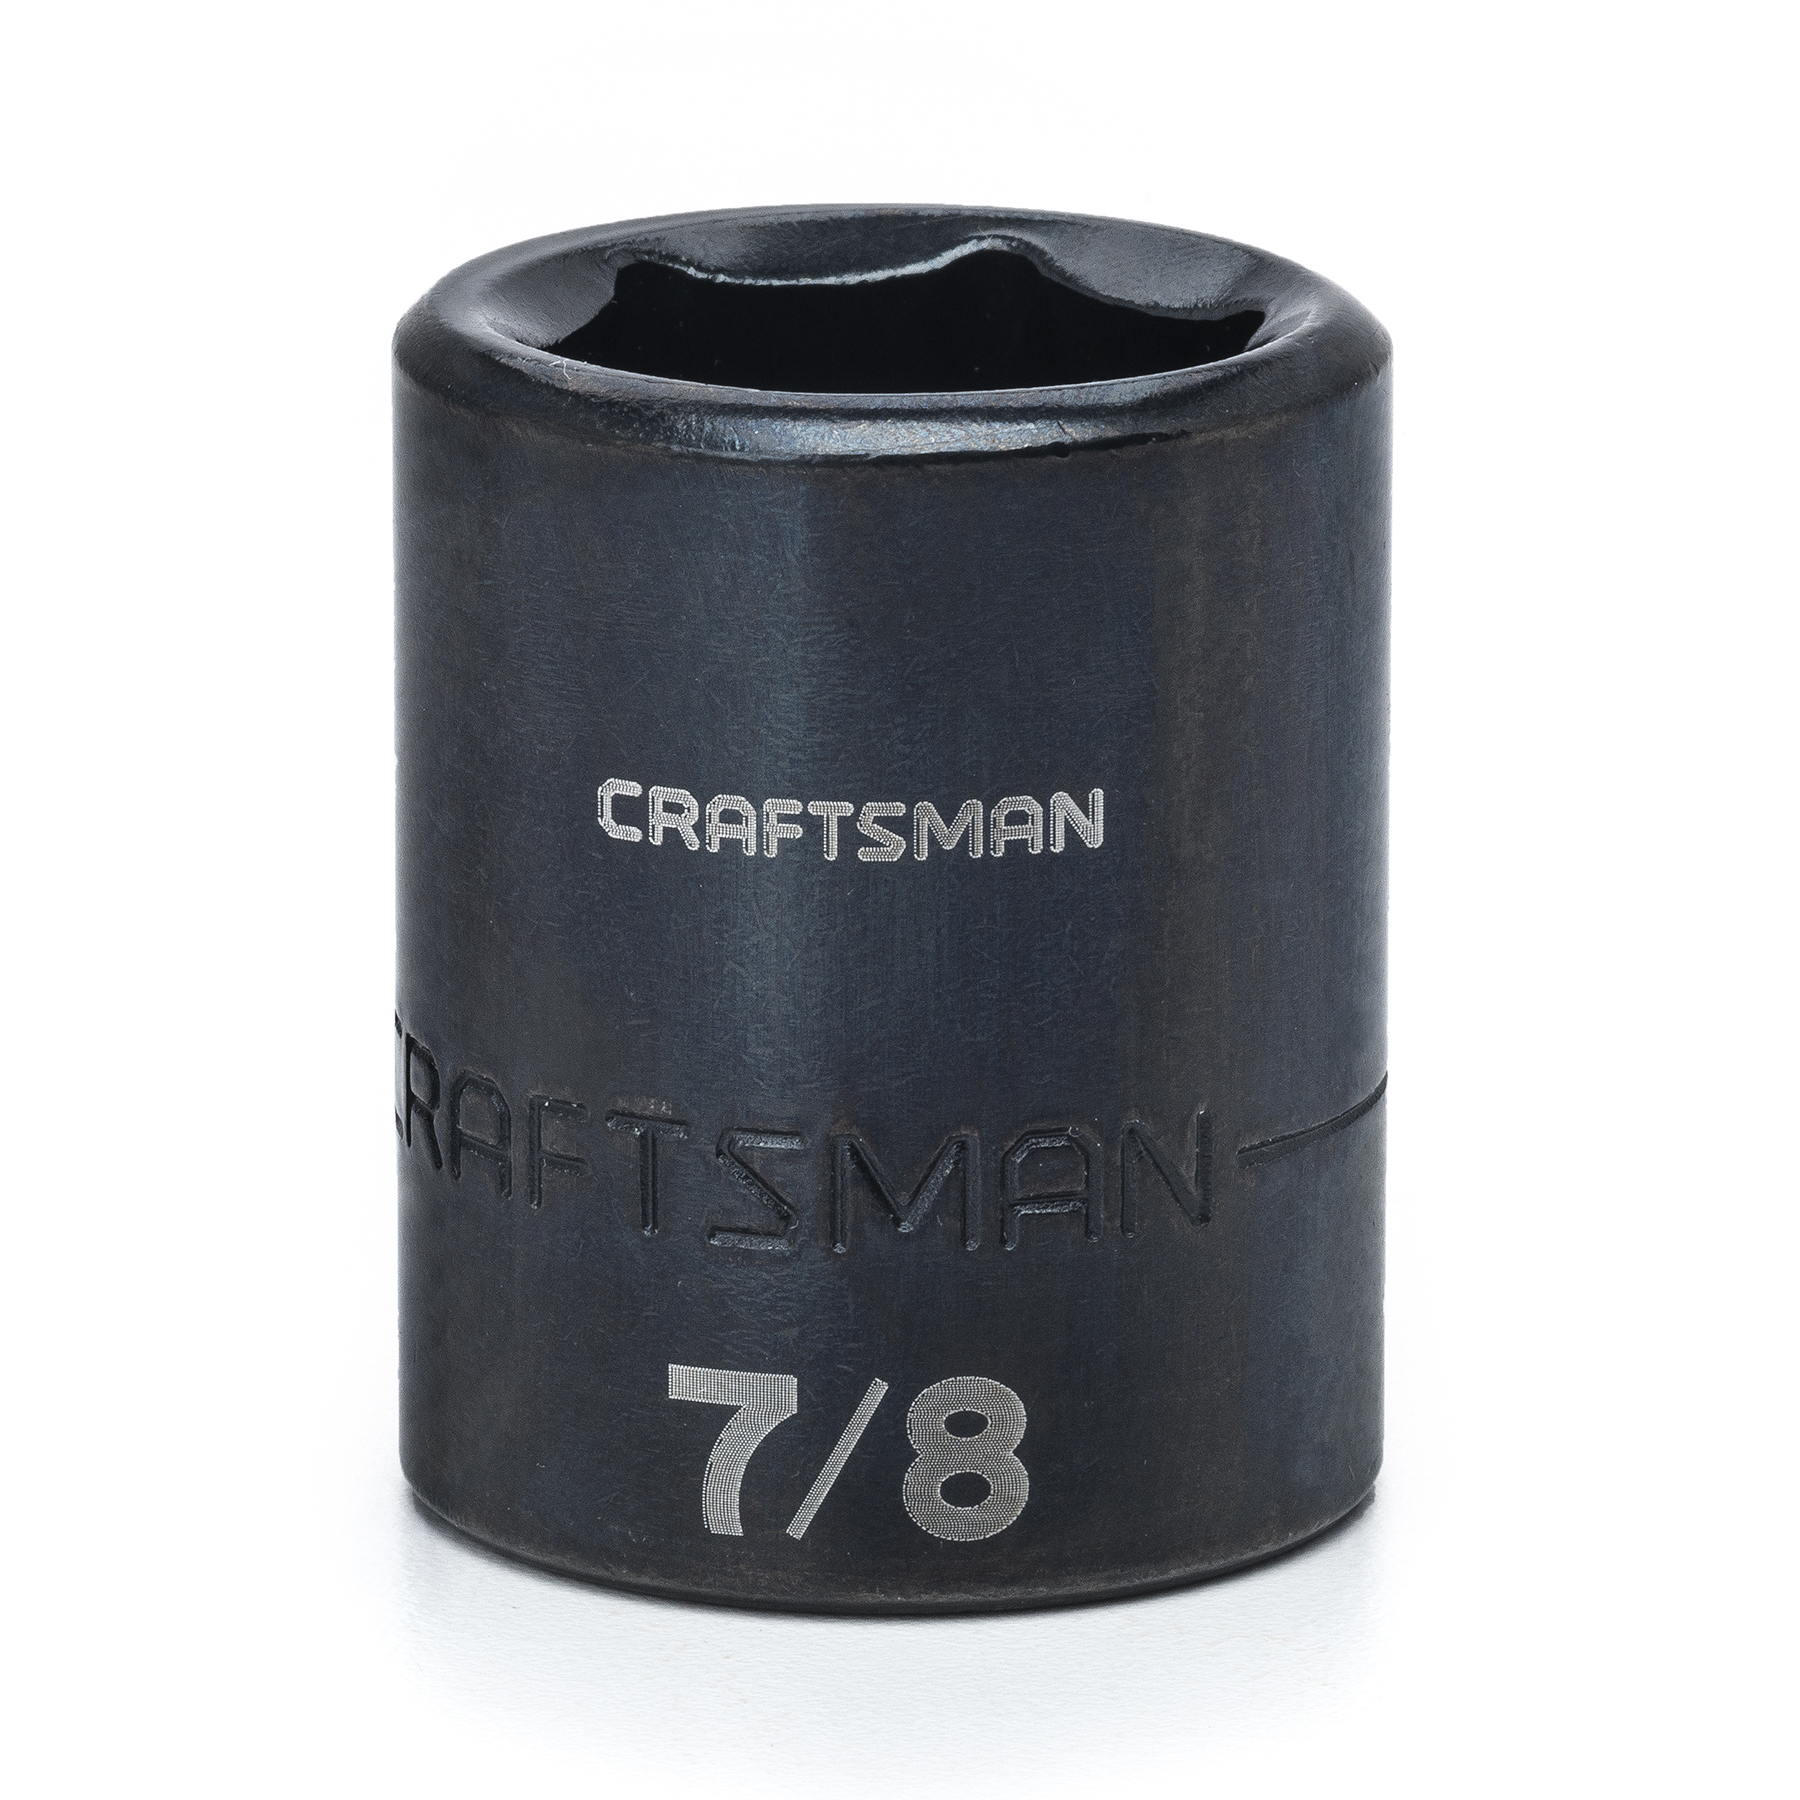 Craftsman 7/8 in., 13mm, 6 pt. 1/2 in. Drive, Easy-To-Read Impact Socket